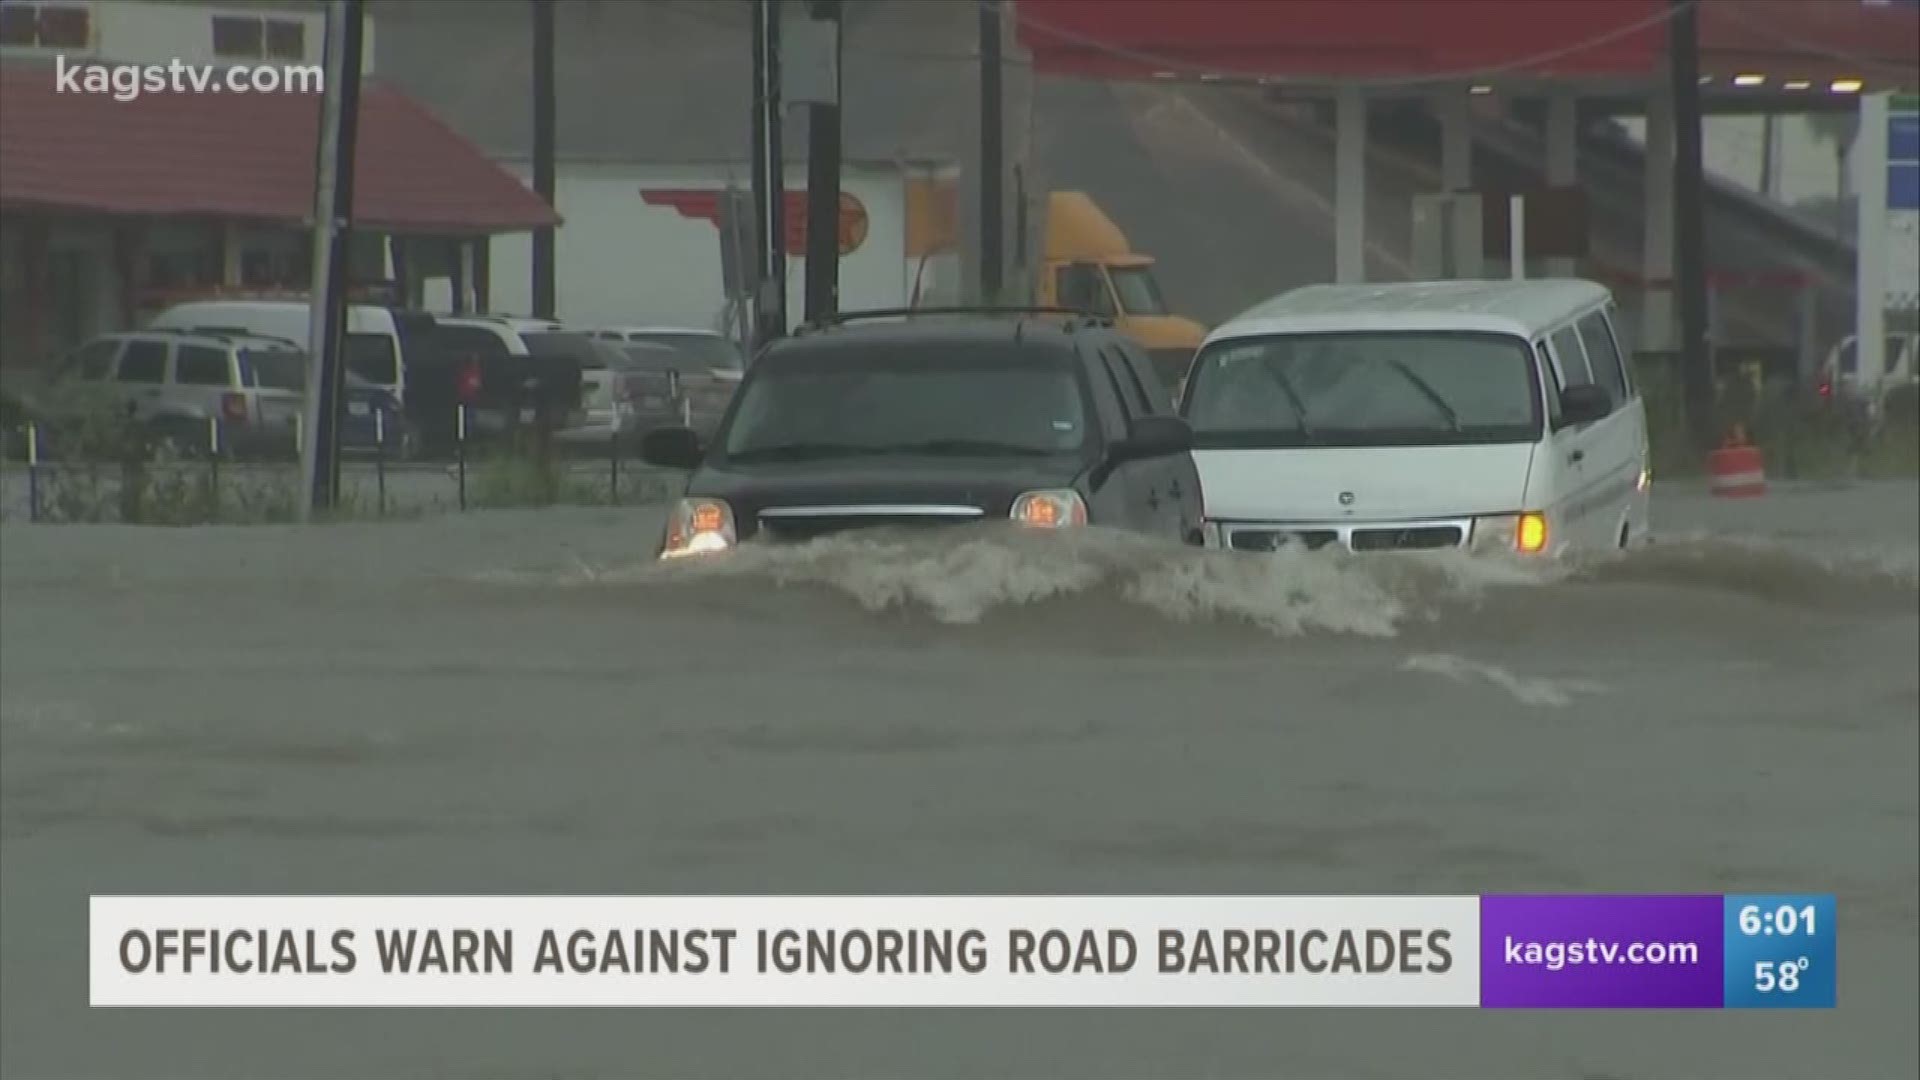 During the storms this week, local authorities had to help several drivers stuck in high water after they drove around safety barricades.